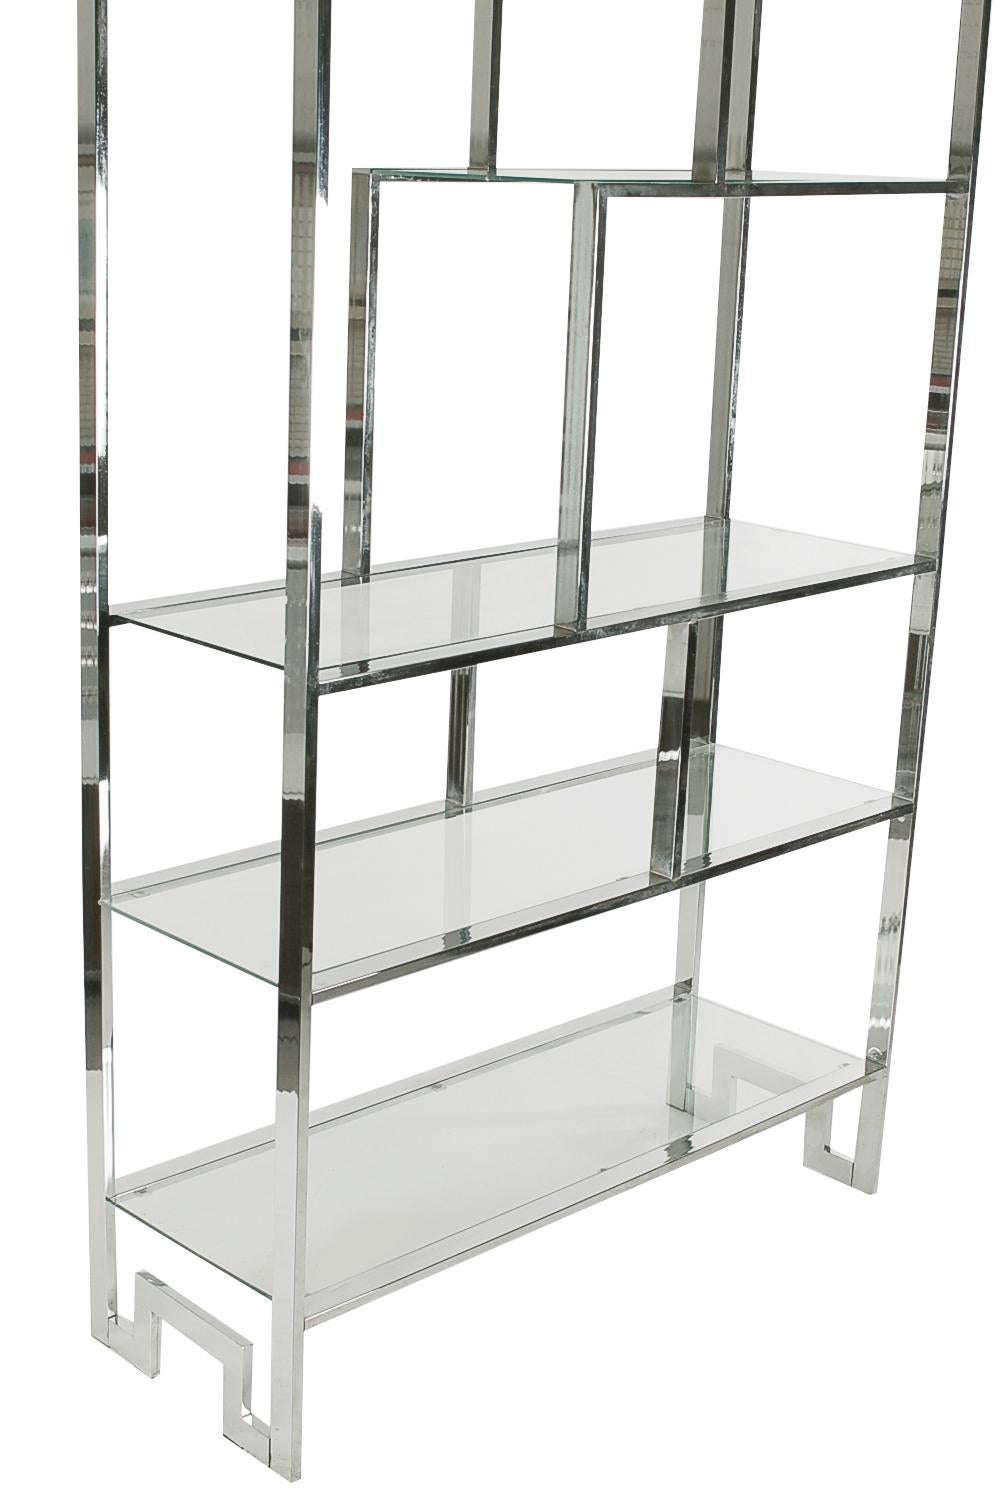 Late 20th Century Matching Pair of Mid-Century Modern Chrome and Glass Etagere after Milo Baughman